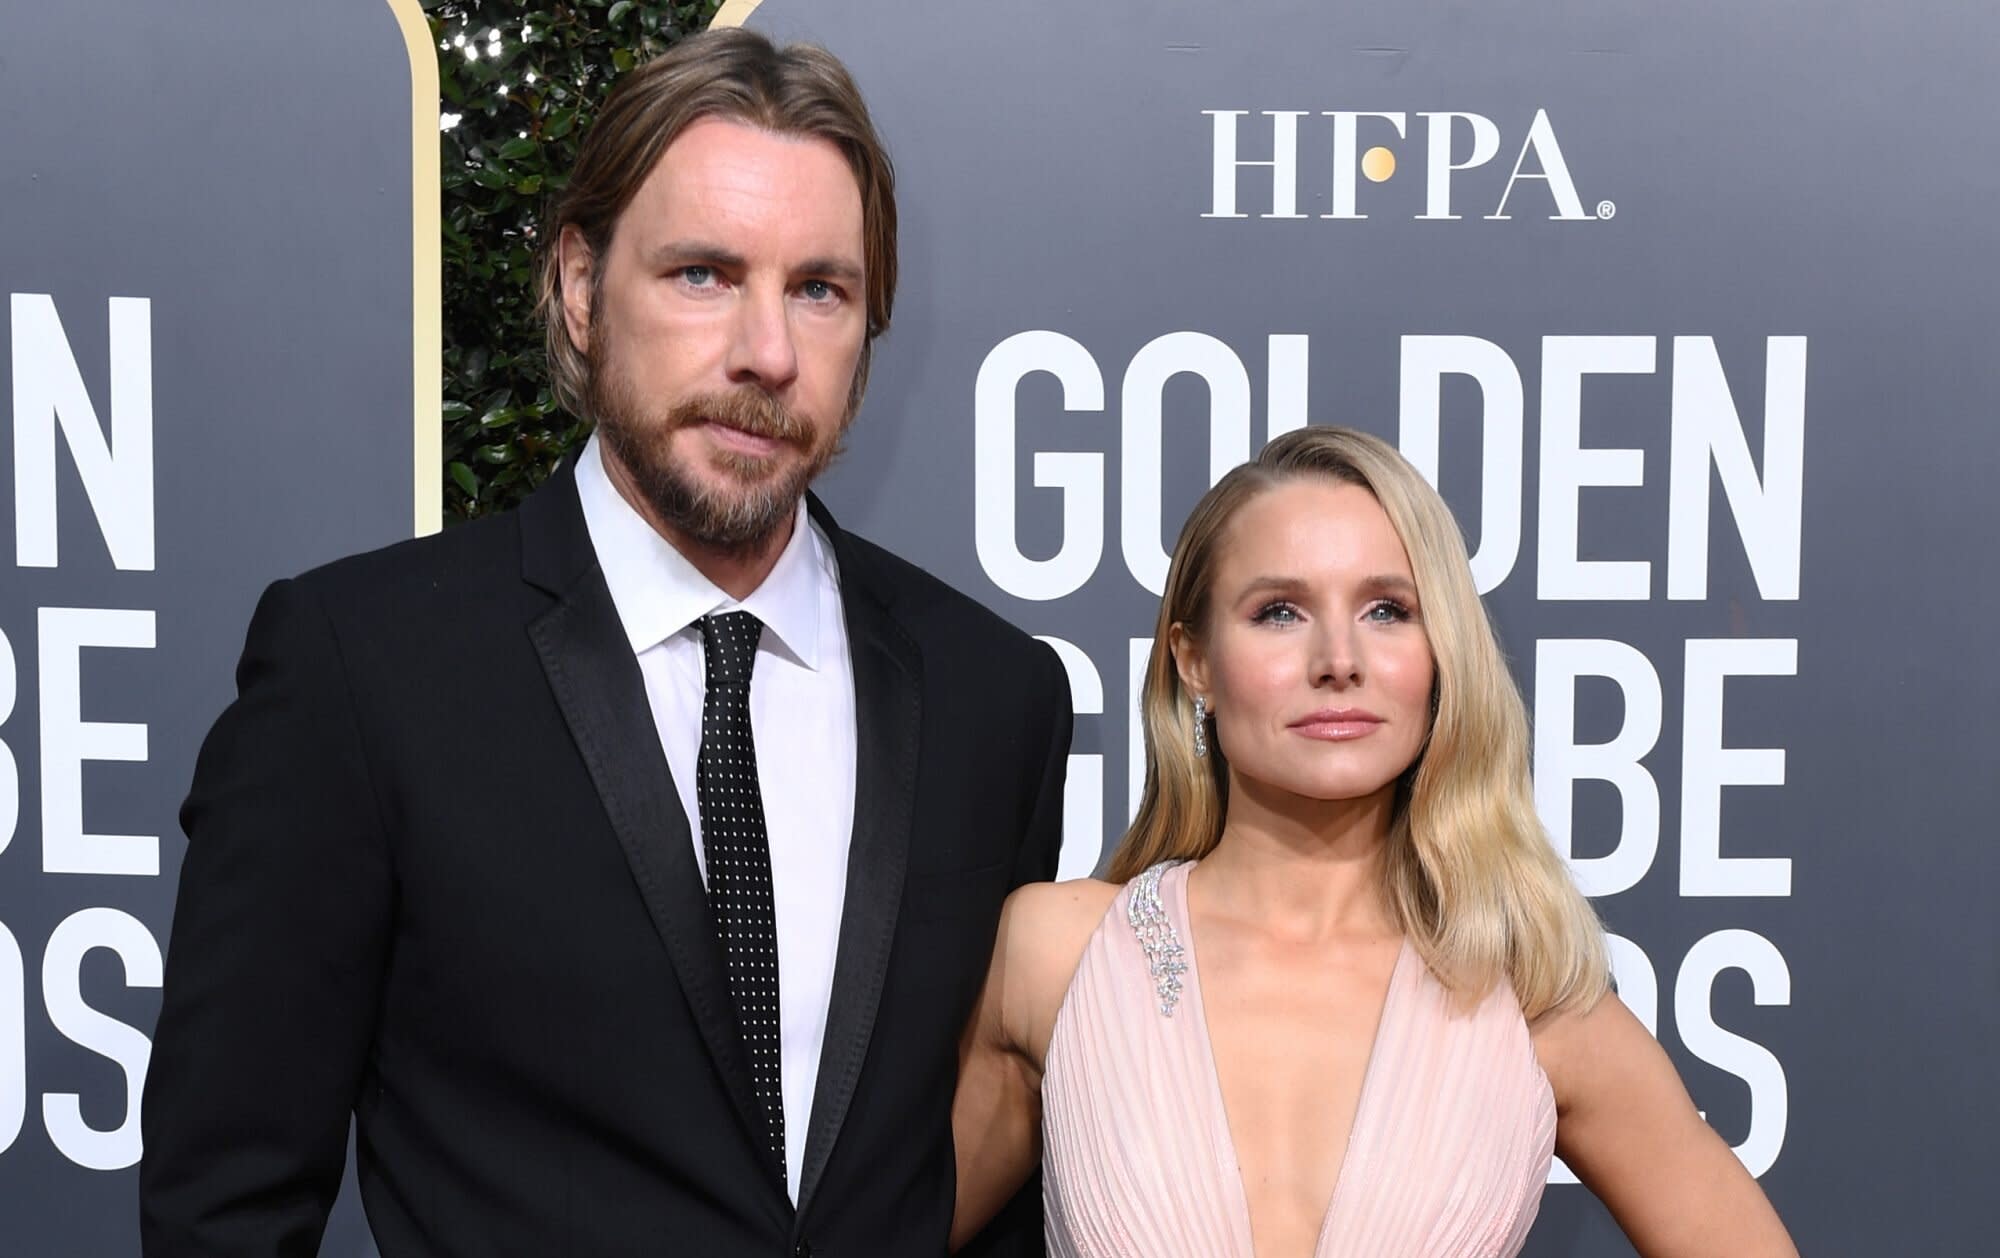 Kristen Bell Got Refreshingly Real About How Hard Marriage Can Be